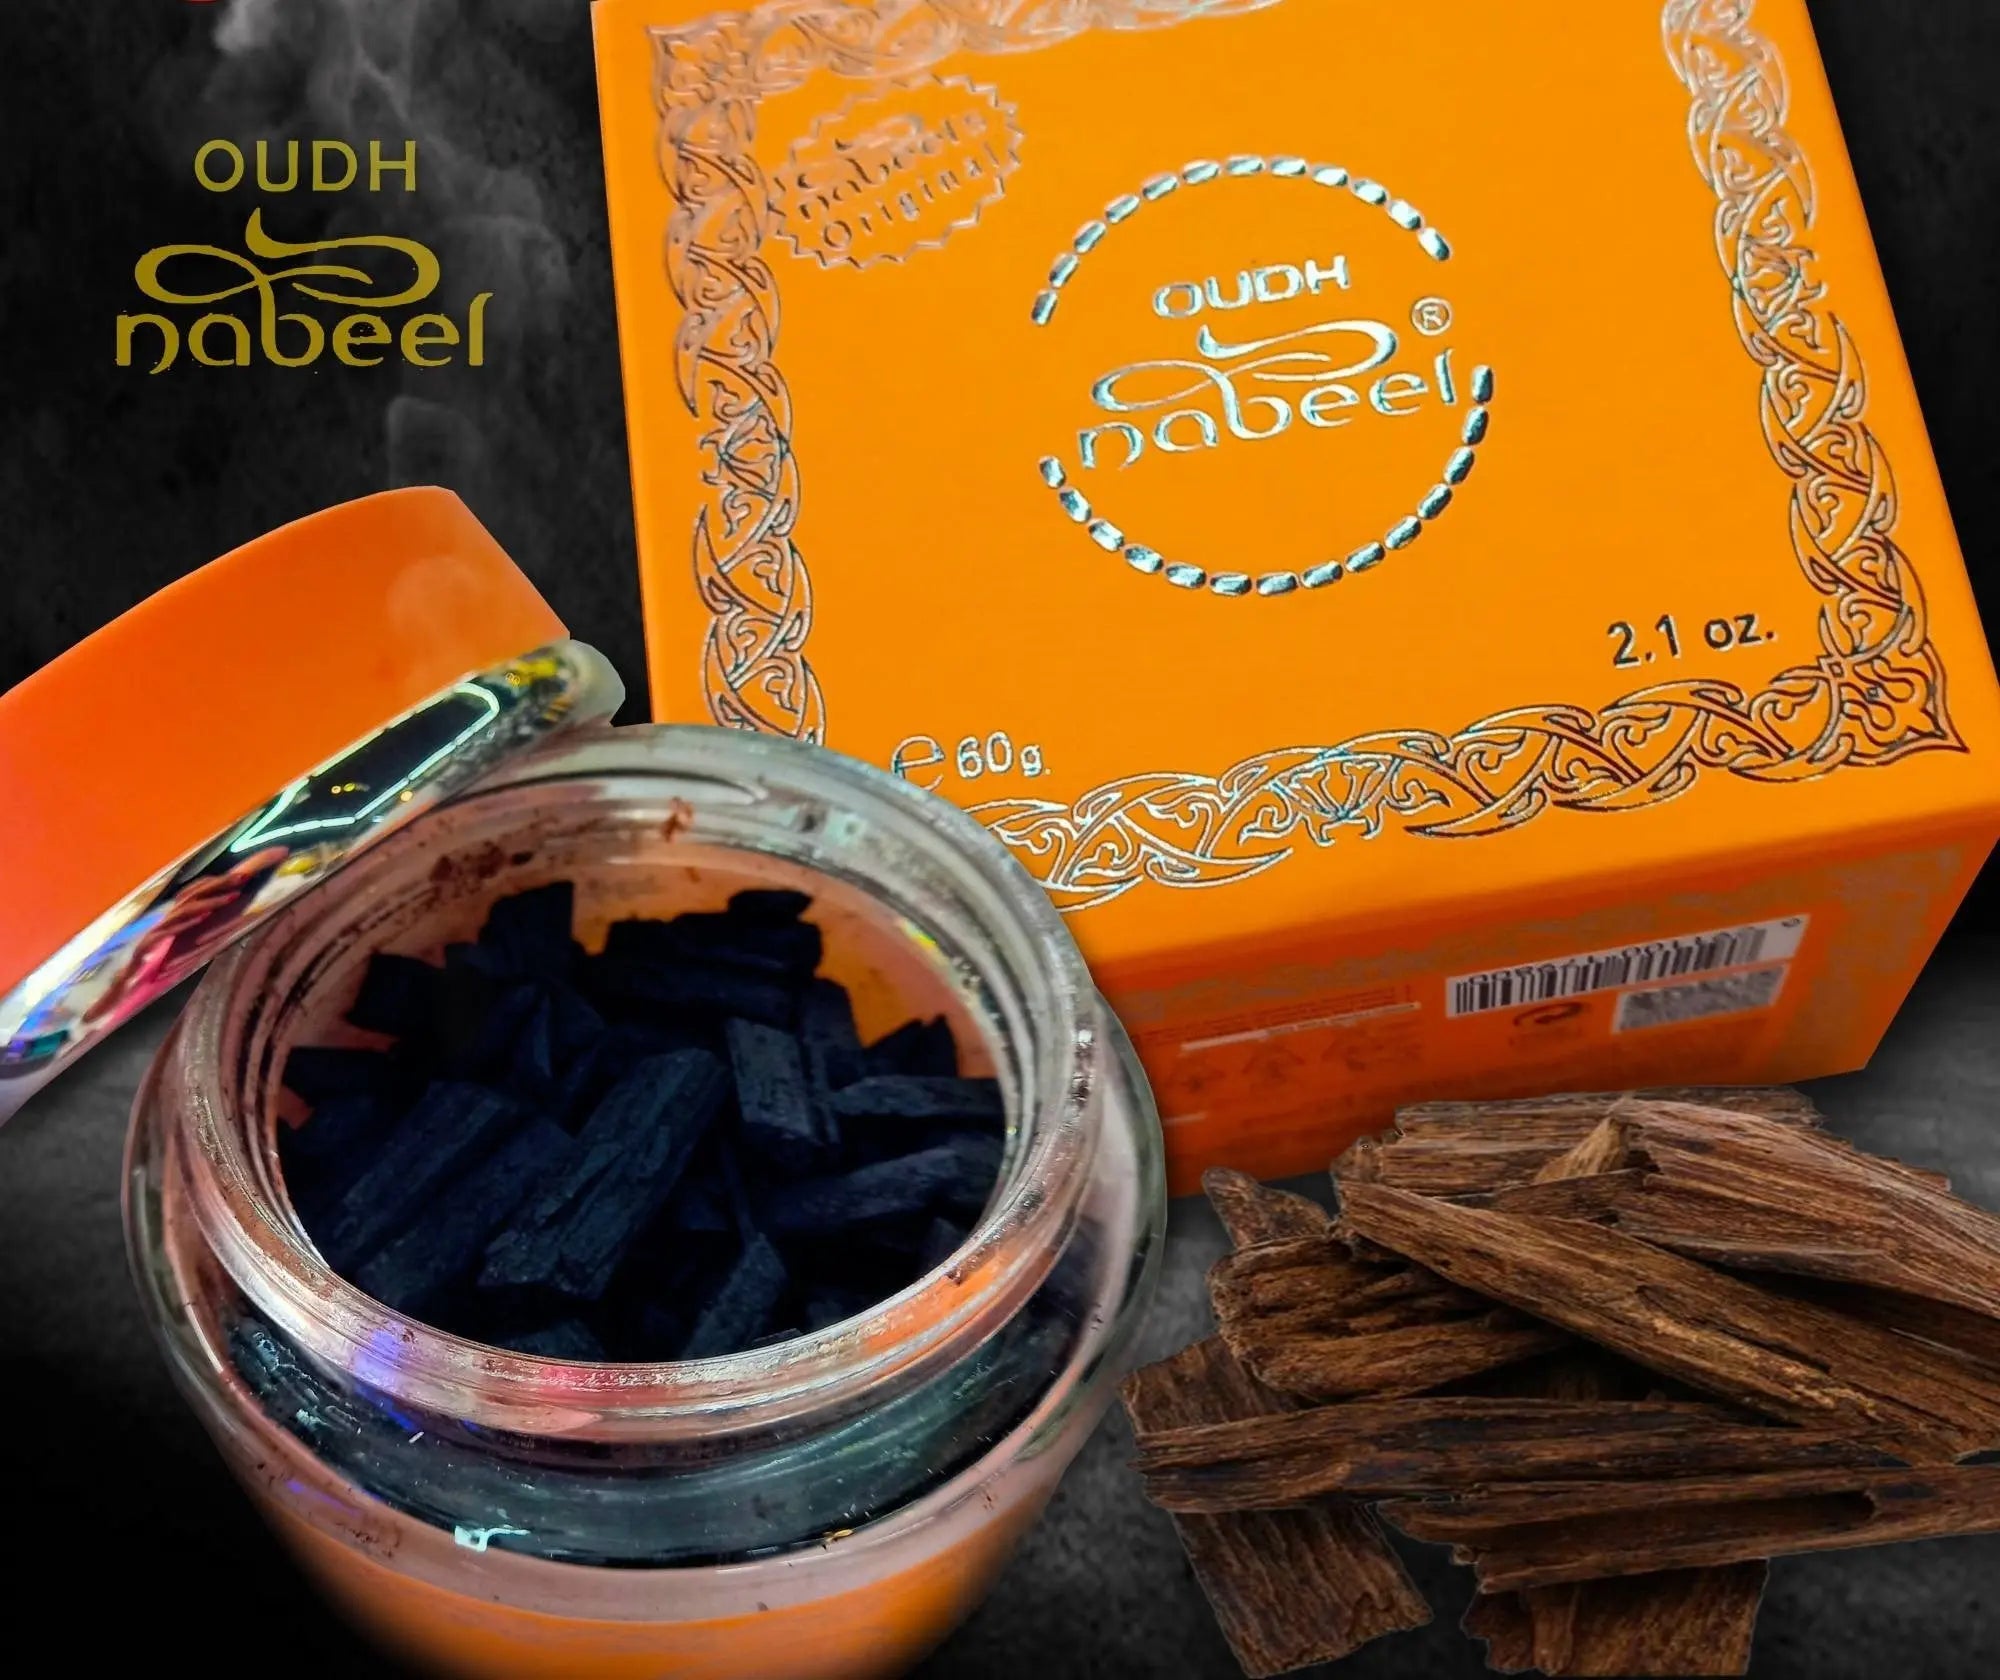 The image is a dynamic presentation of Nabeel Oudh products. It shows a glass jar opened to reveal dark oudh chips inside, with a metallic rainbow-colored lid reflecting light. In the background, there is an orange box with white decorative lace-like patterns and the "OUDH Nabeel" branding in white. There are also raw pieces of oudh wood scattered in the foreground, suggesting the natural source of the chips.